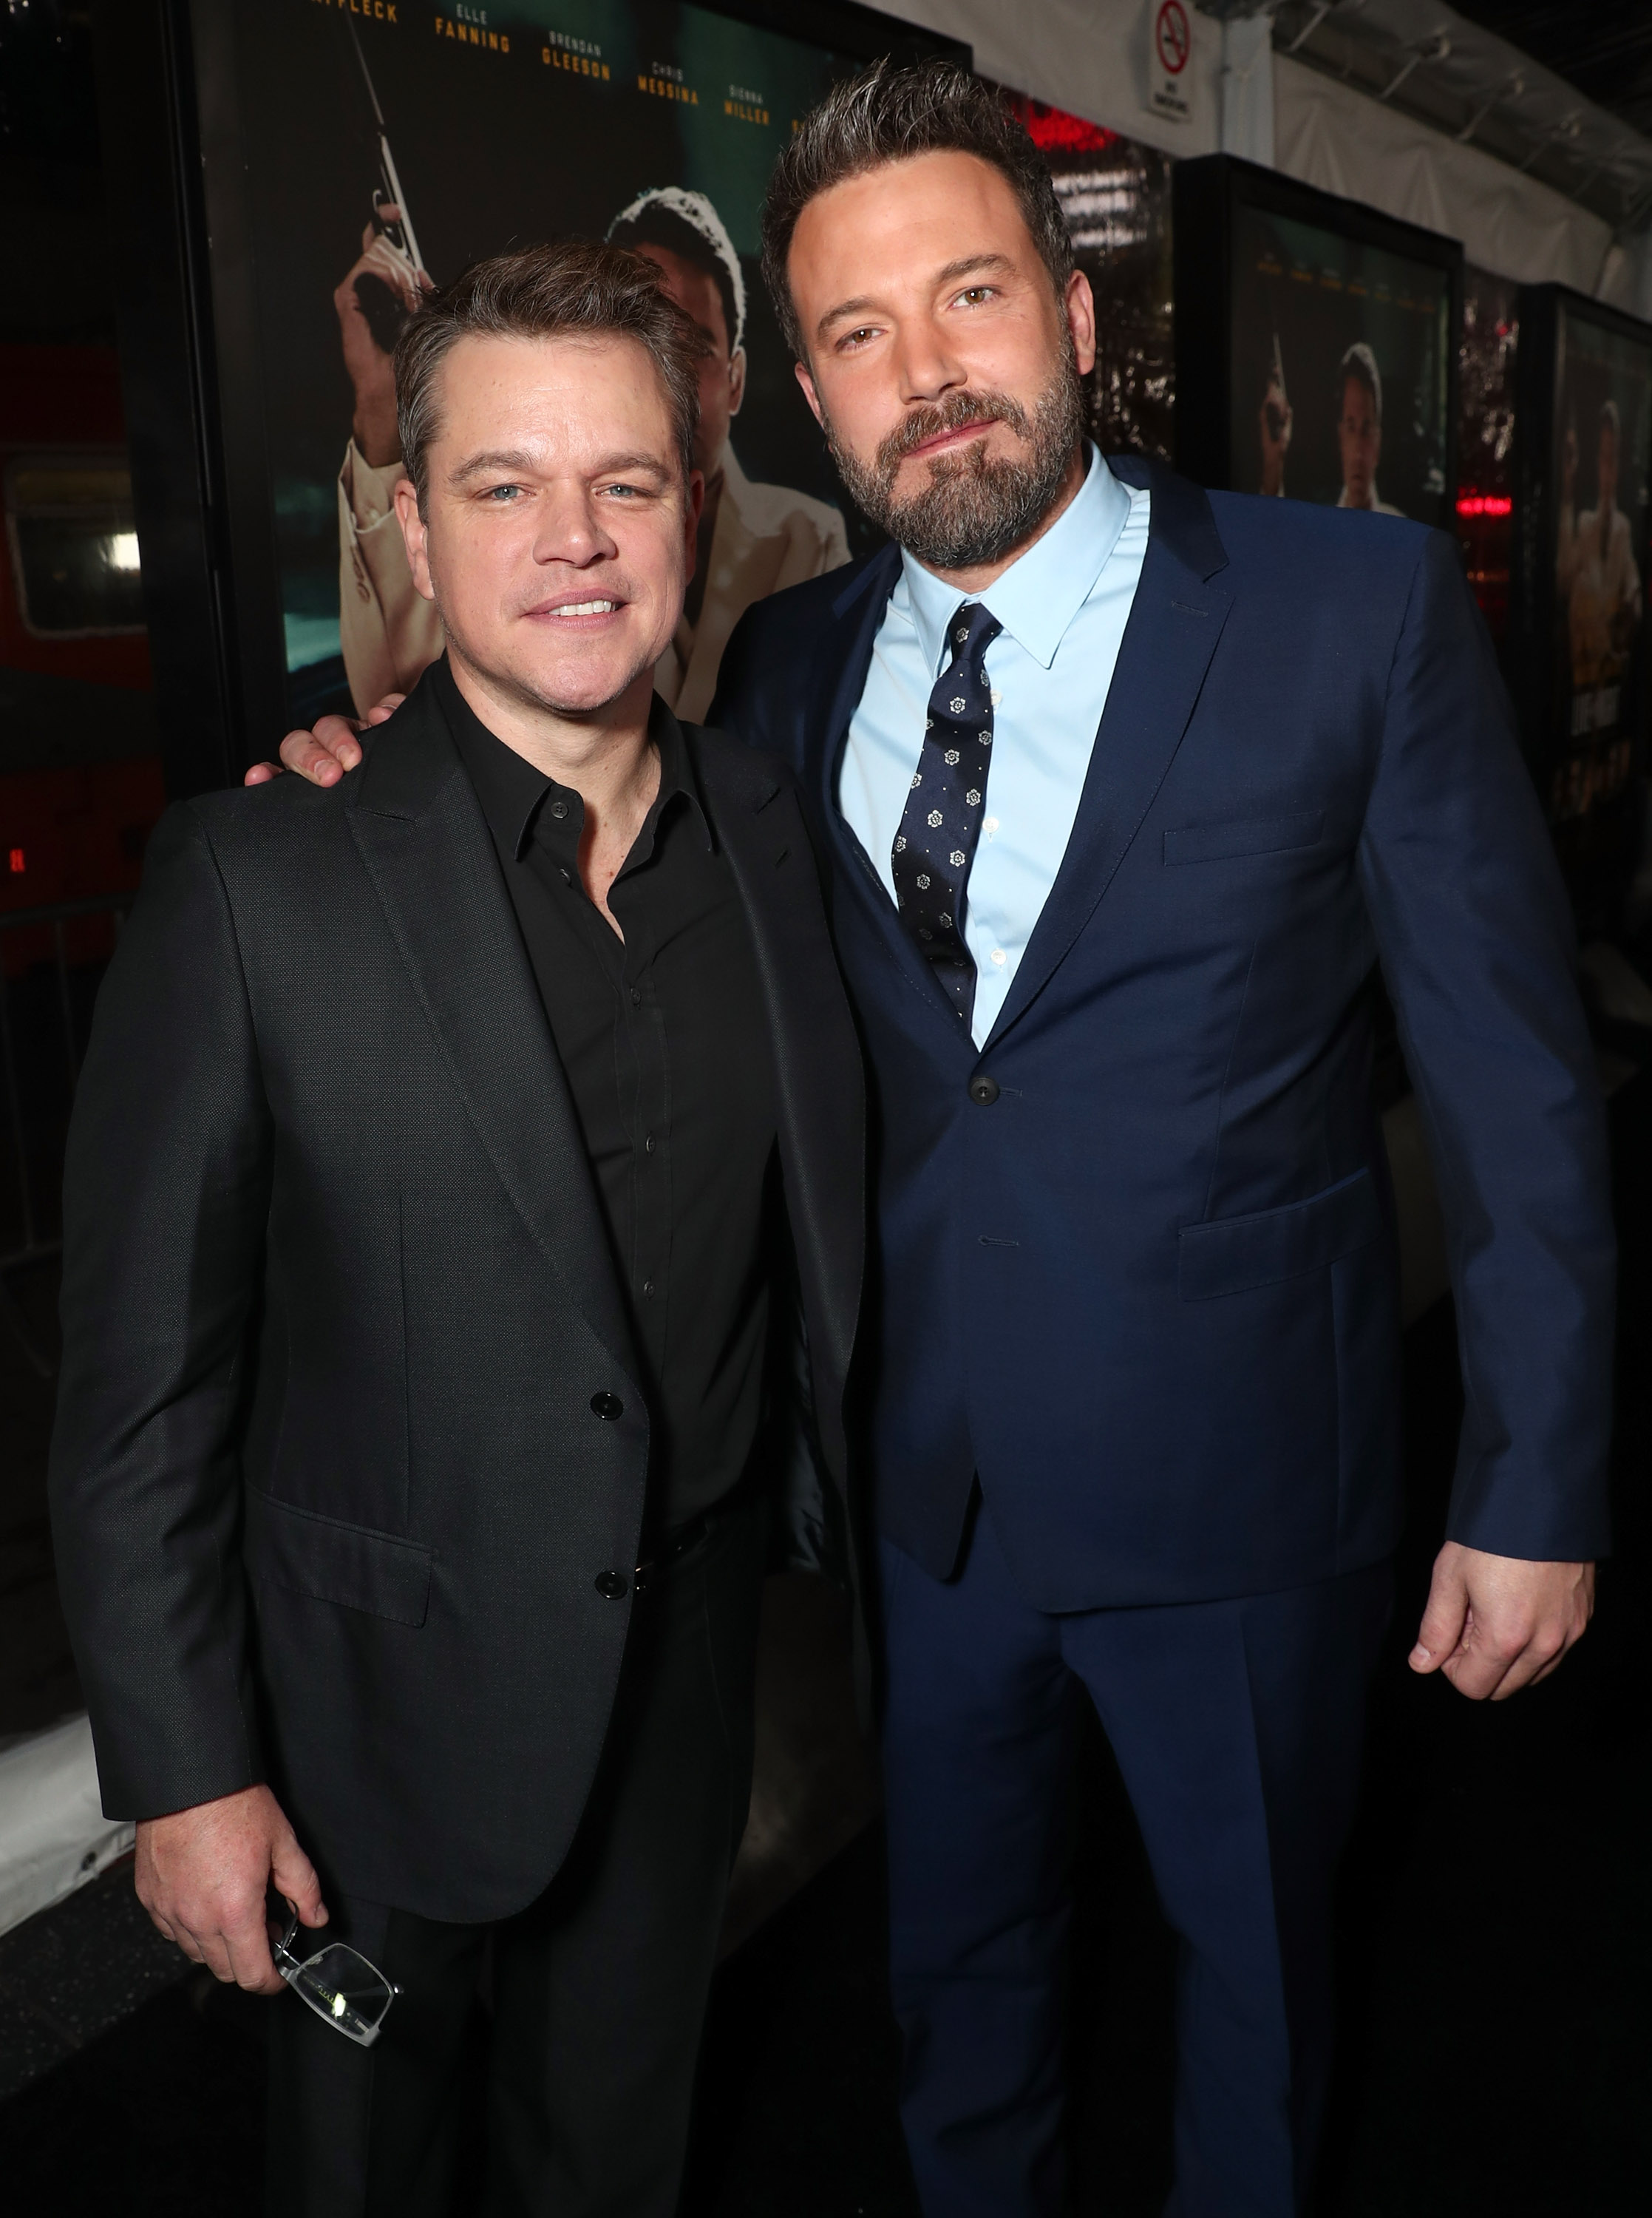 Matt Damon and Ben Affleck at the premiere of "Live By Night" in Hollywood, California on January 9, 2017| Source: Getty Images